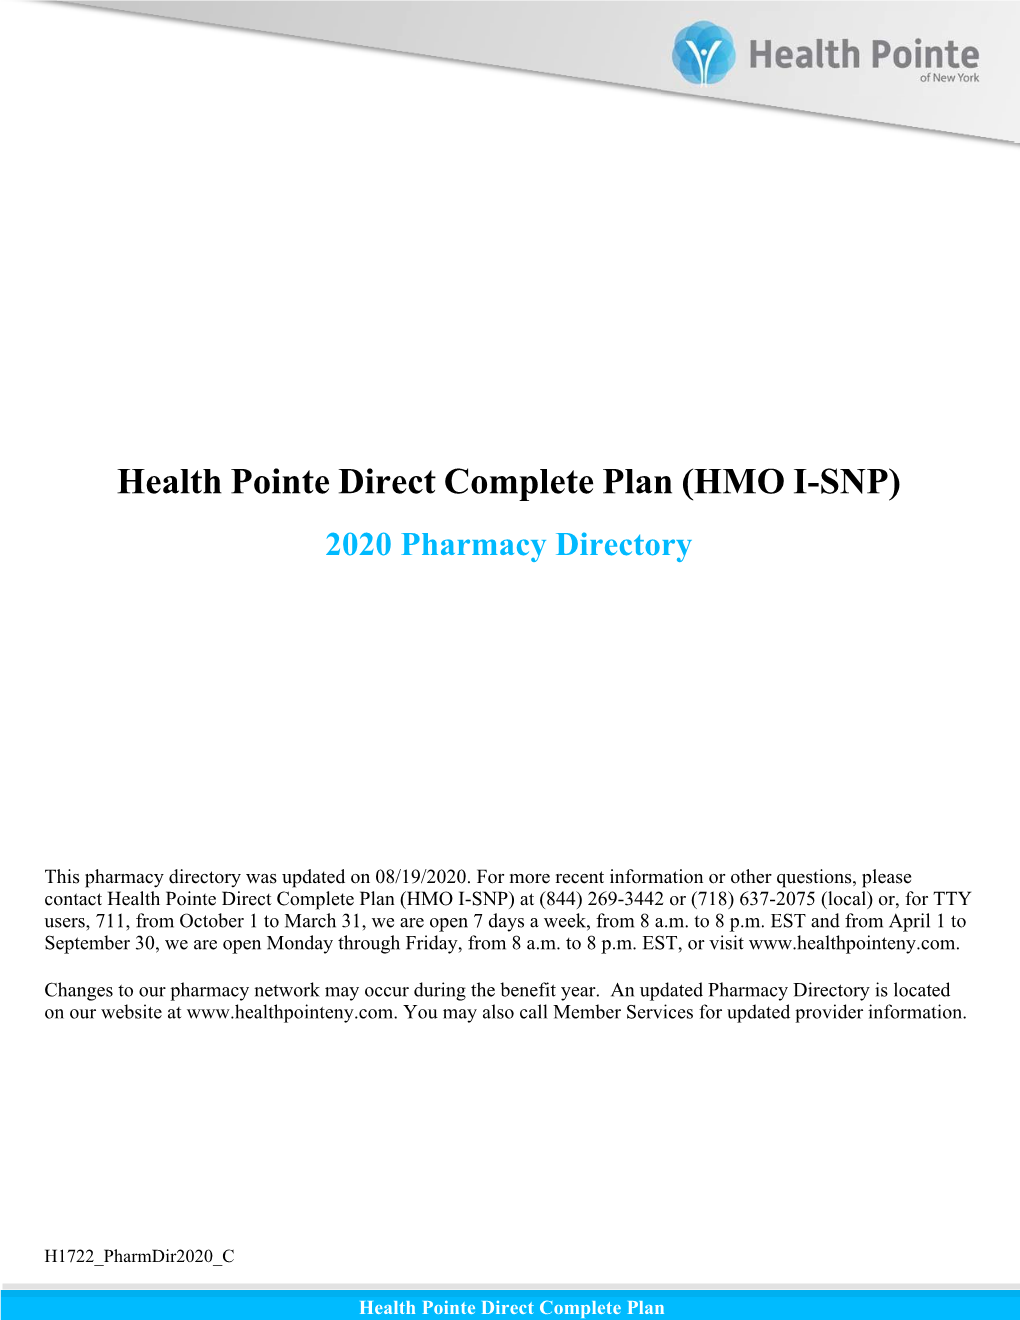 Health Pointe Direct Complete Plan (HMO I-SNP) 2020 Pharmacy Directory